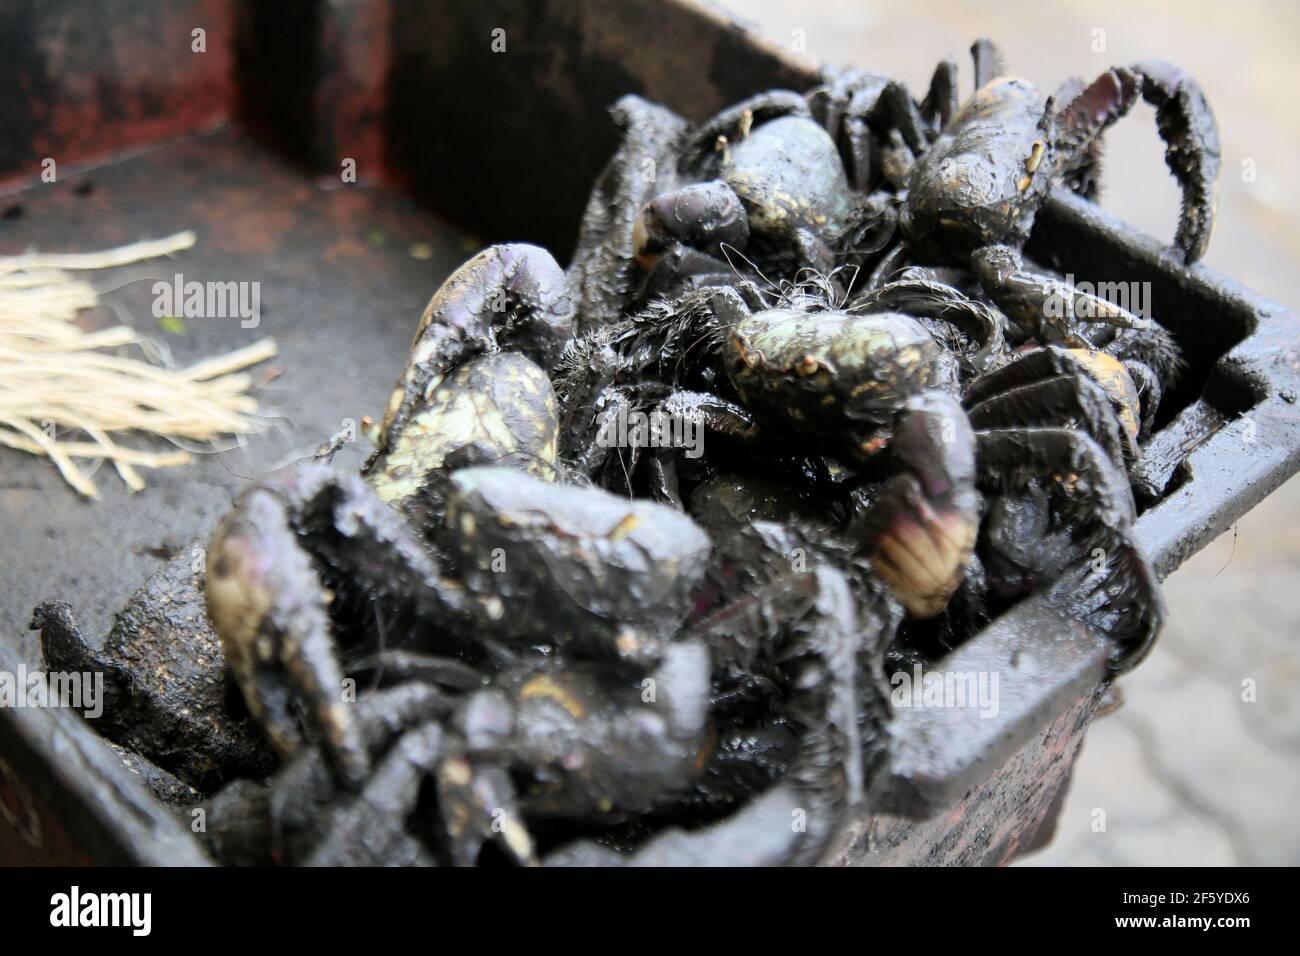 salvador, bahia, brazil - january 19, 2021: uca crab - Ucides cordatus - is seen for sale at the Sao Joaquim fair in the city of Salvador. Stock Photo